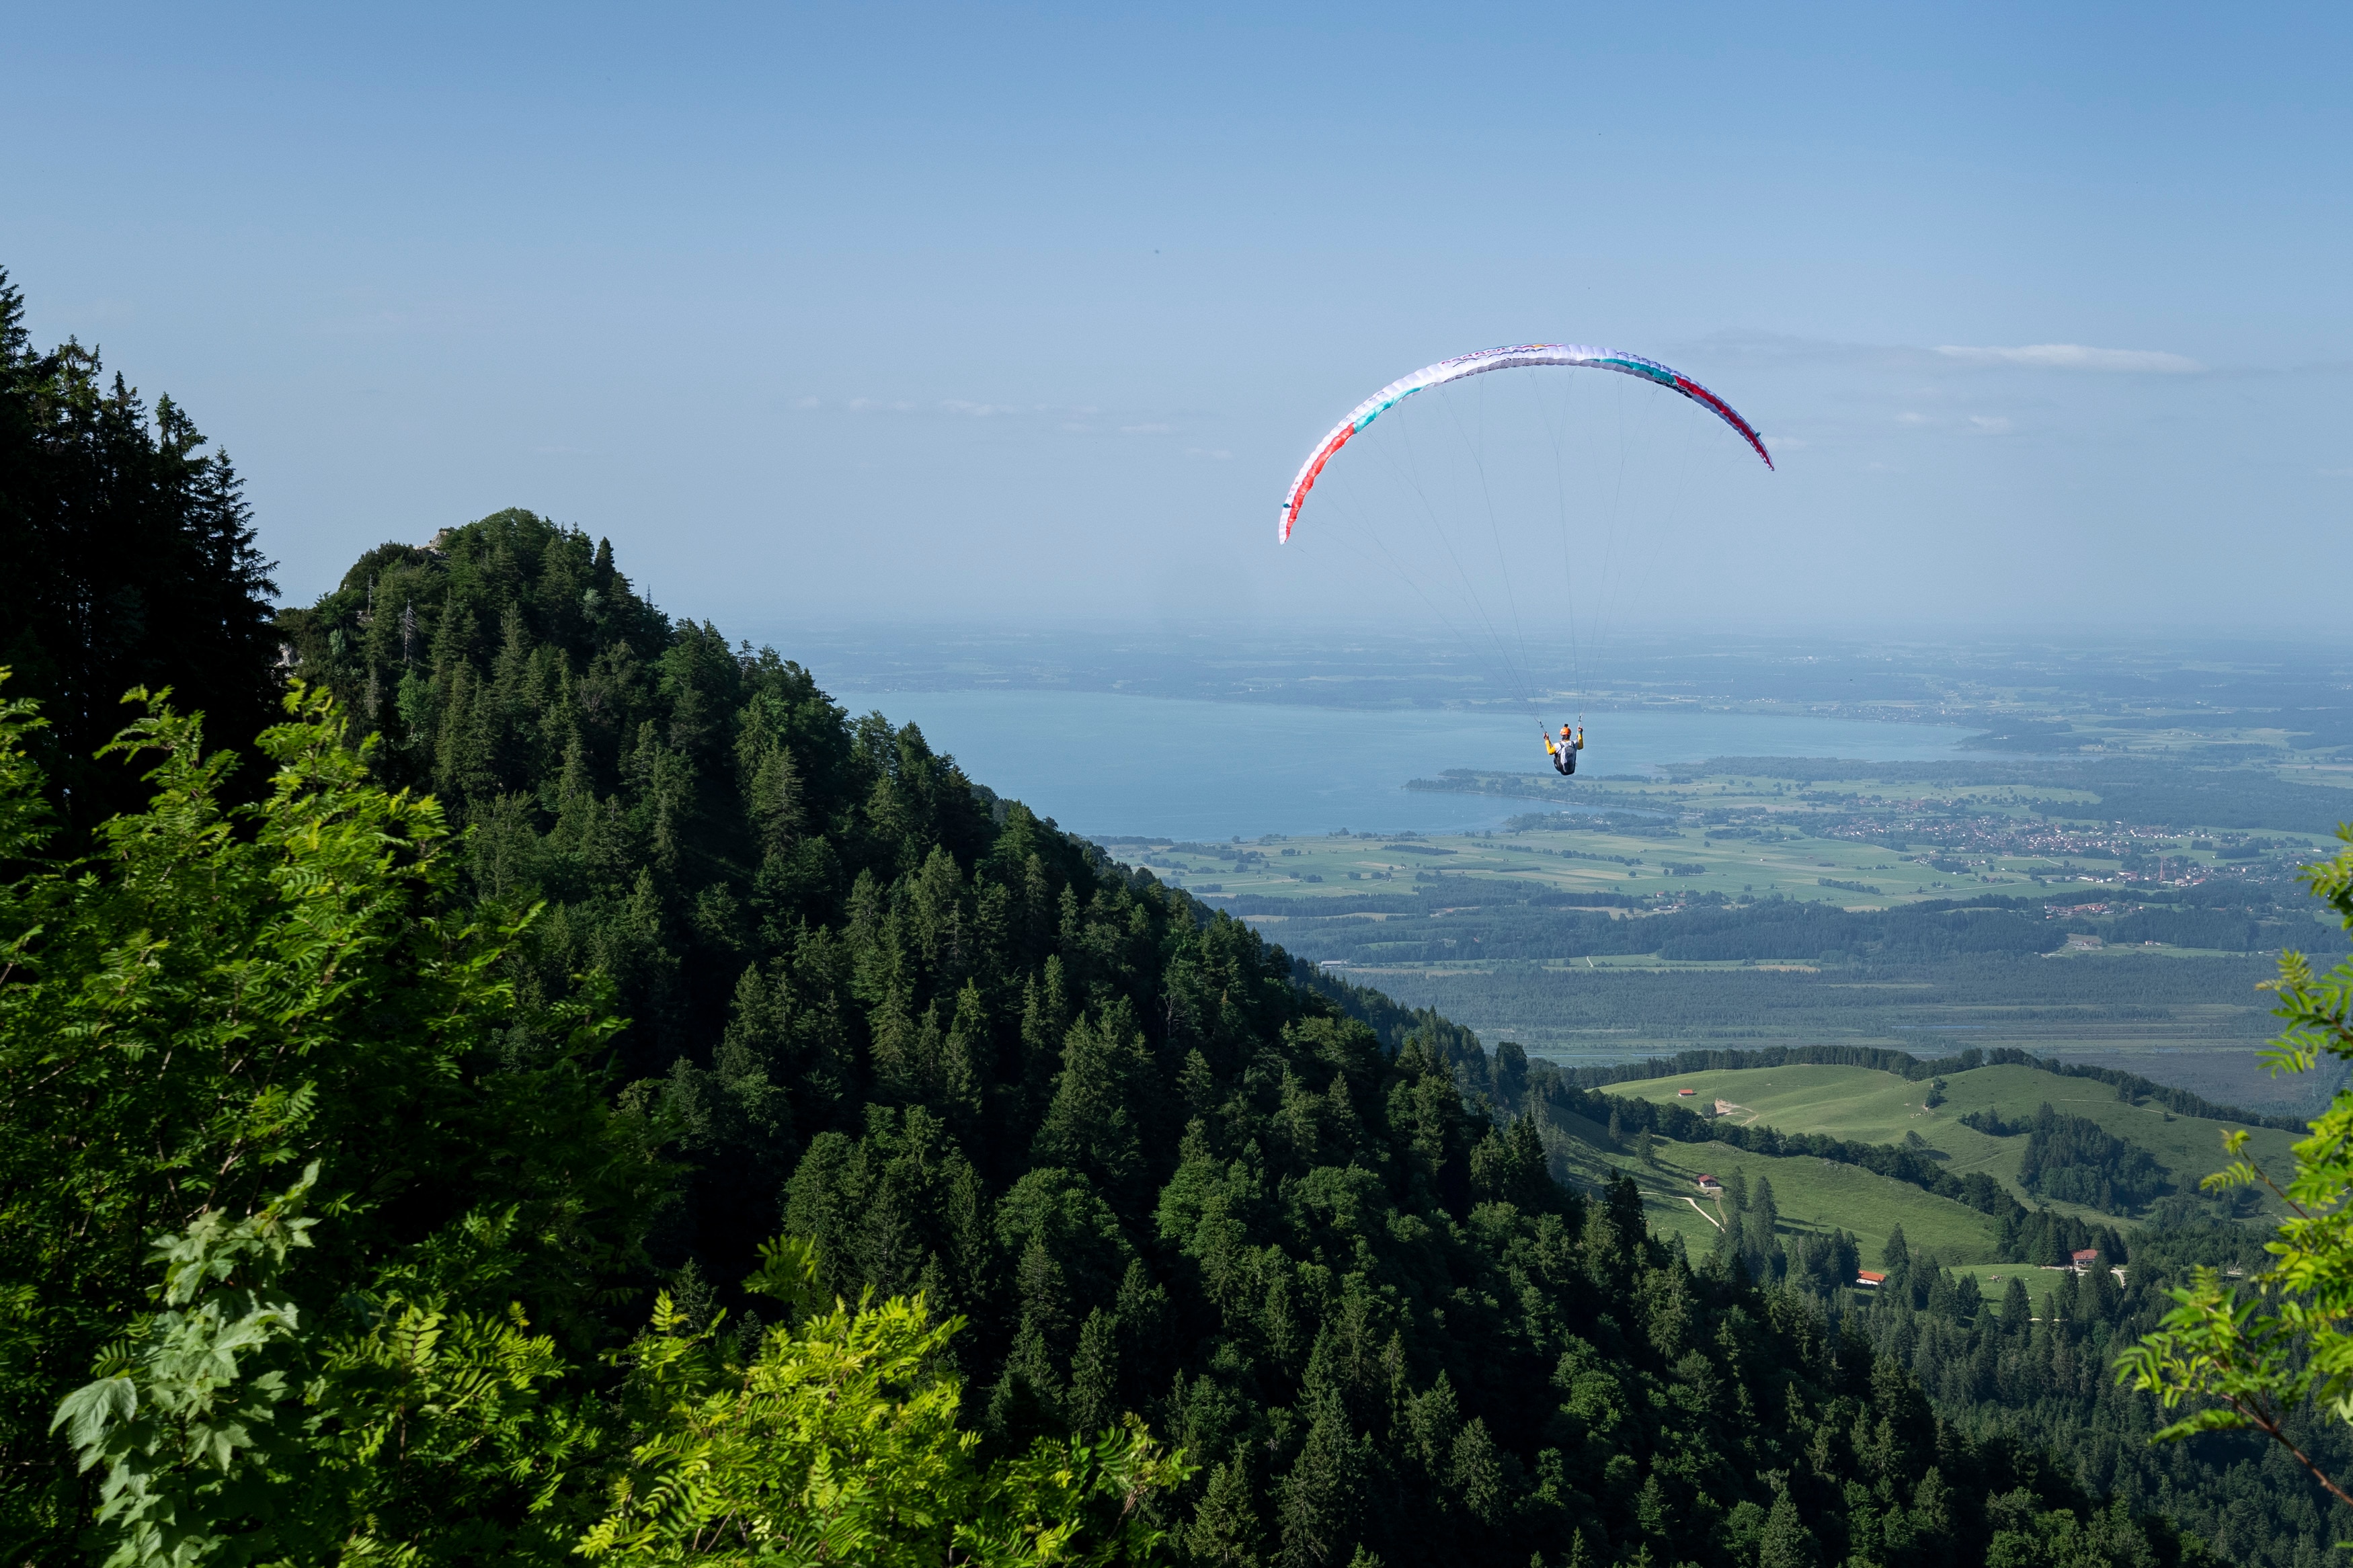 SUI1 performs during the Red Bull X-Alps in Marquartstein, Germany on June 21, 2021.